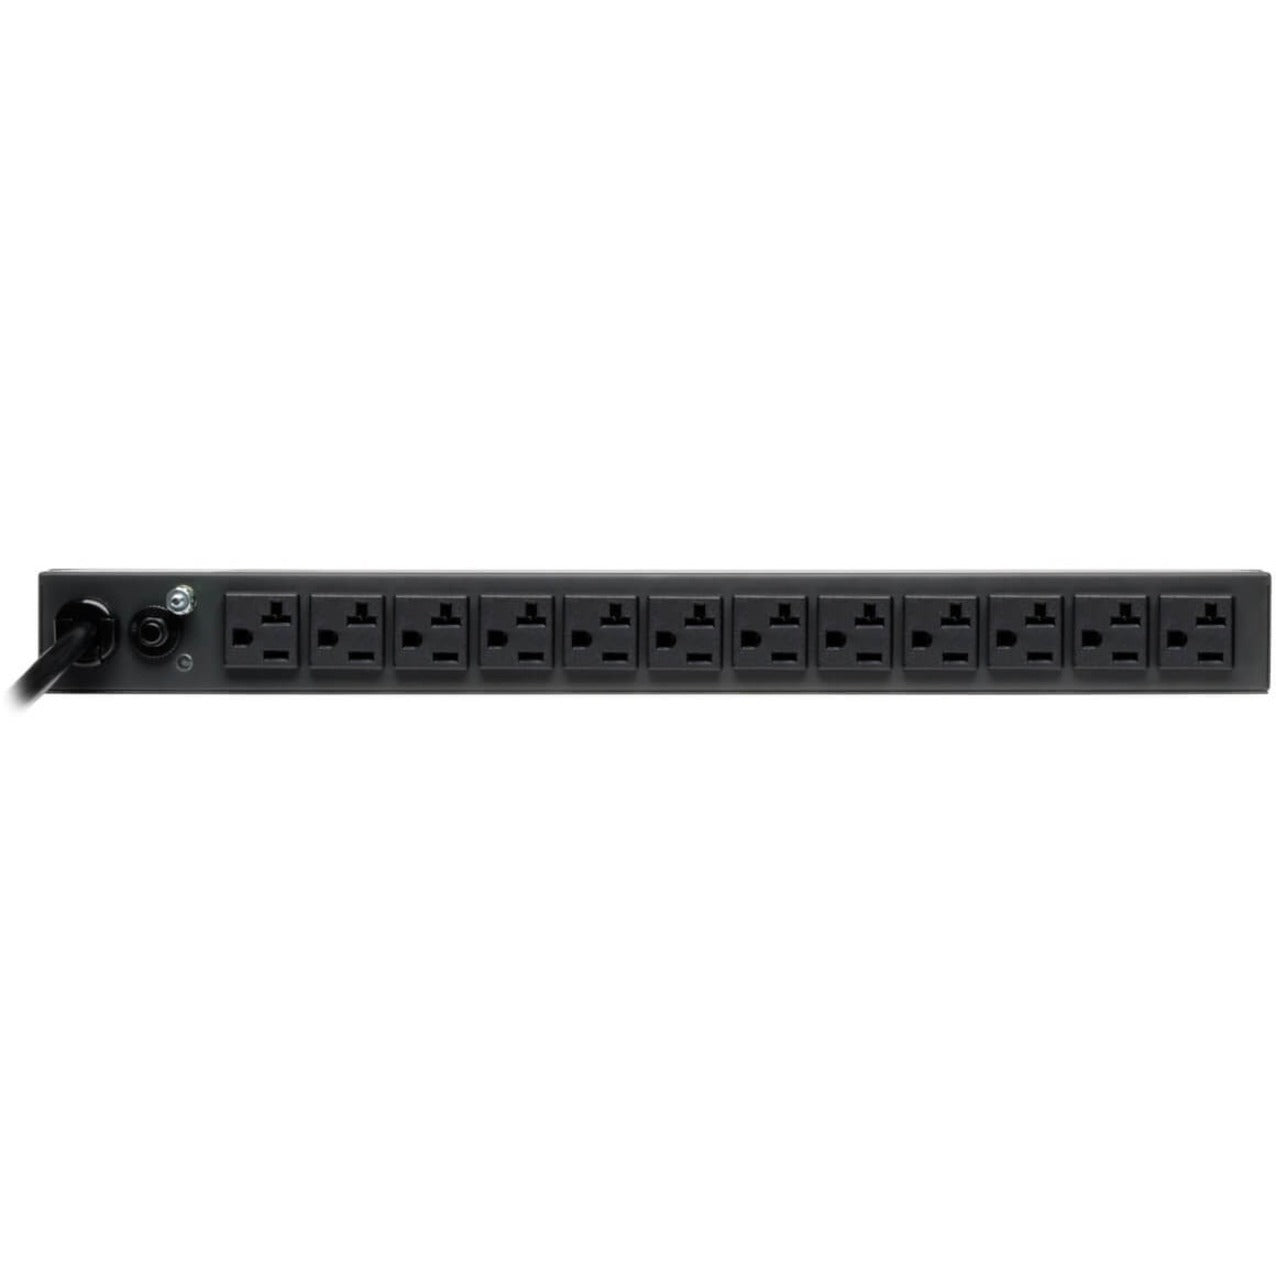 Tripp Lite PDU1220 PDU Basic 120V 20A 13 Outlet, Power Multiple Loads in Rackmount and Wallmount Applications